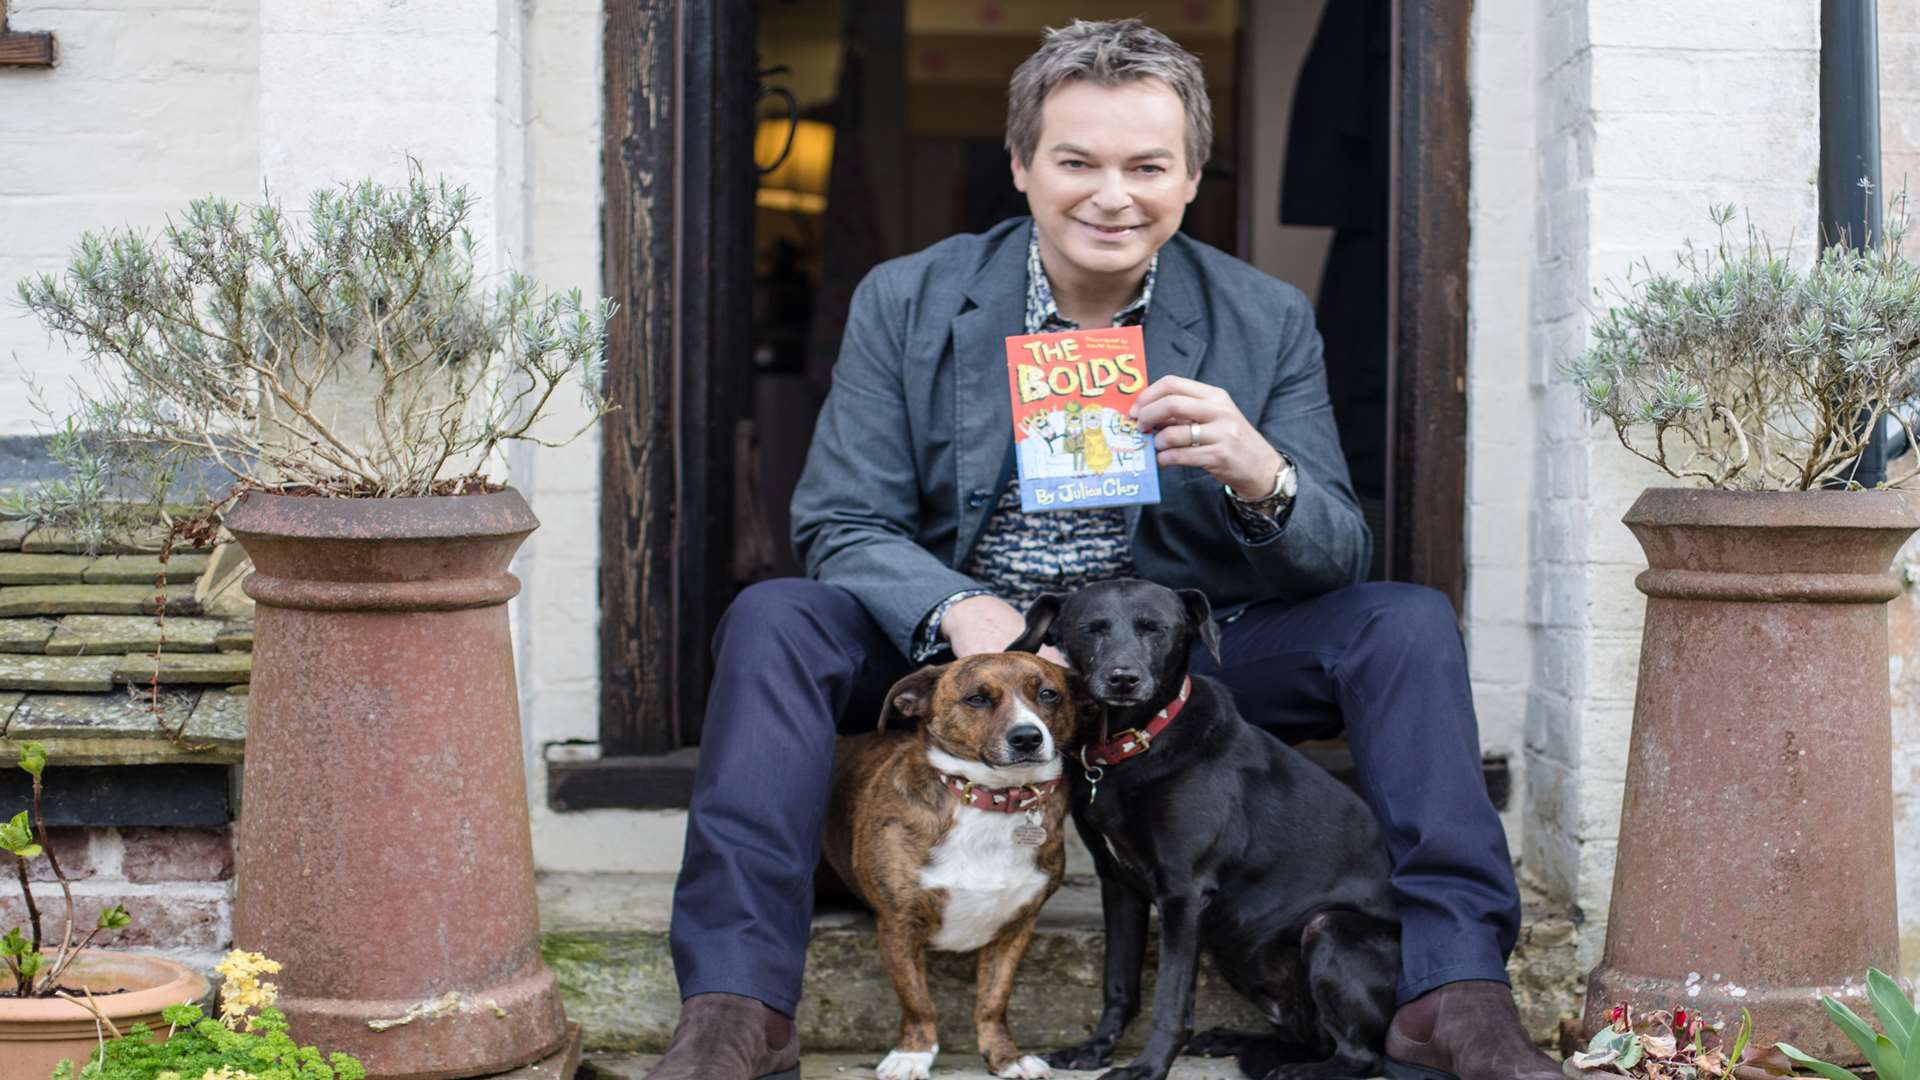 Julian Clary with his World Book Day The Bolds book at home in Kent with his dogs